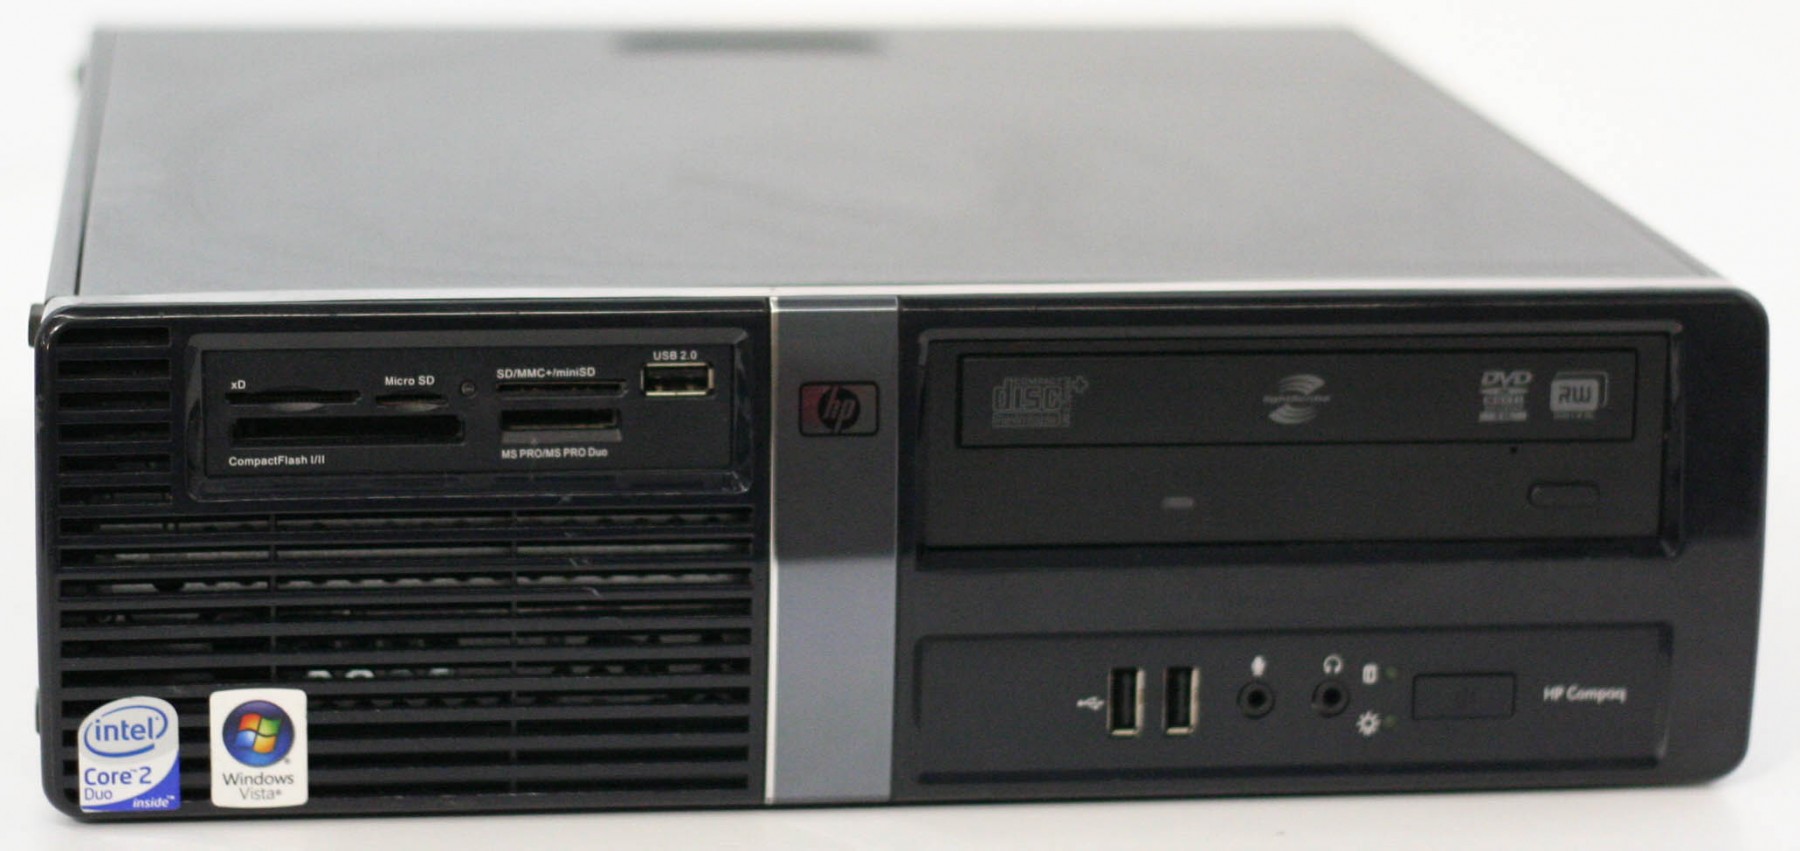 1000462-HP Compaq dx7500 Black Small Form Factor PC-image